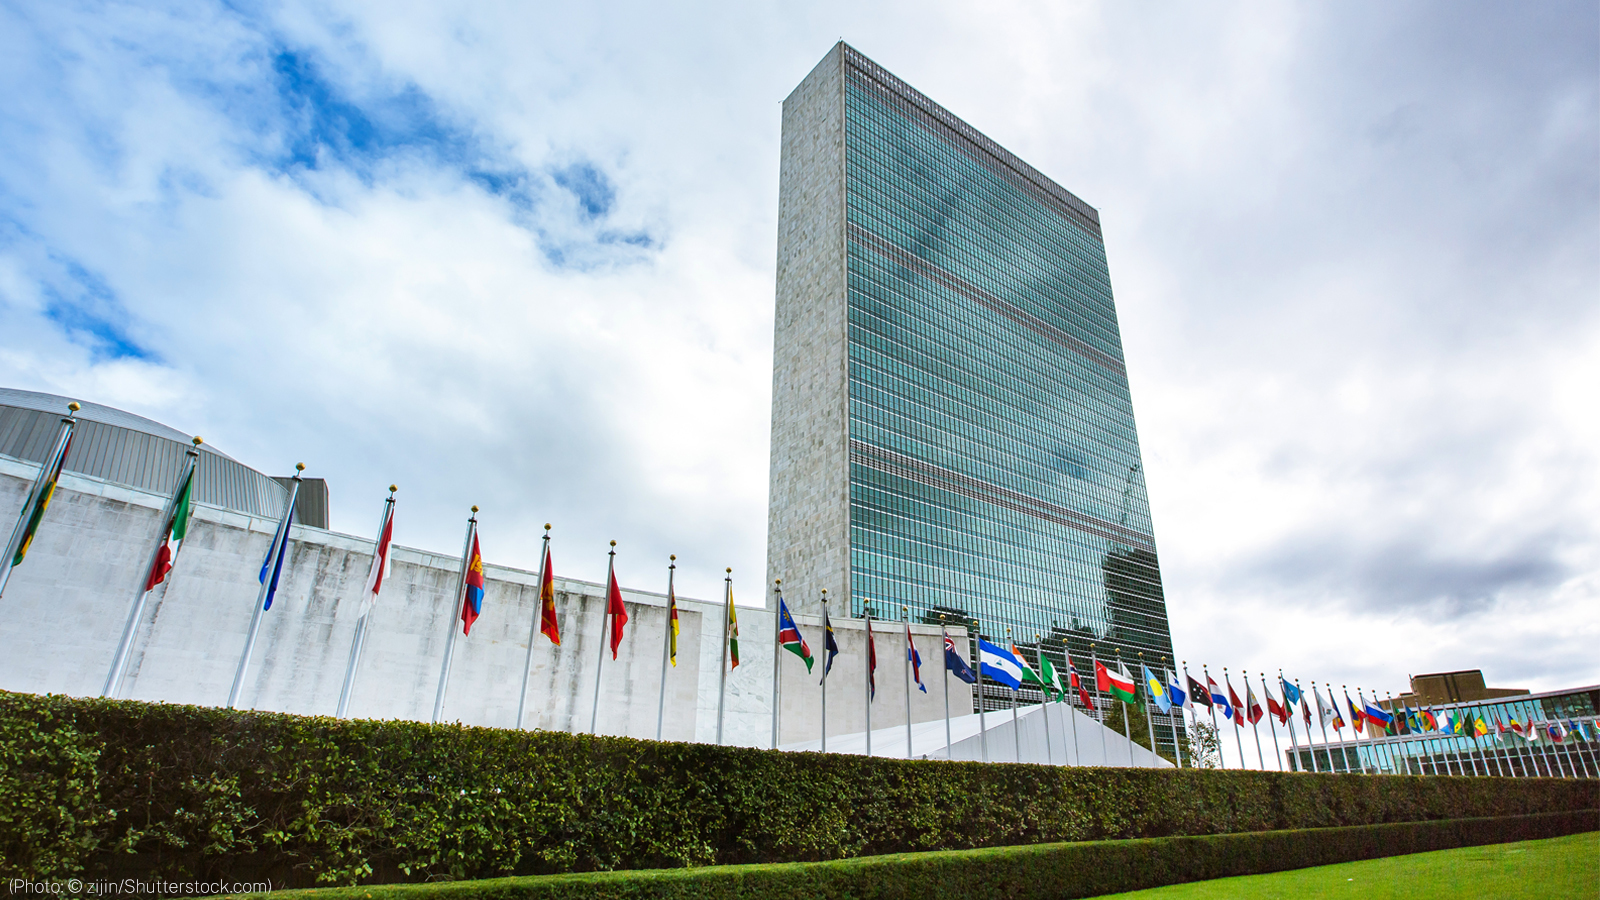 A tall, mirrored building reflects a backdrop of clouds, with a row of flag poles in front bearing the flags of the United Nations member countries.